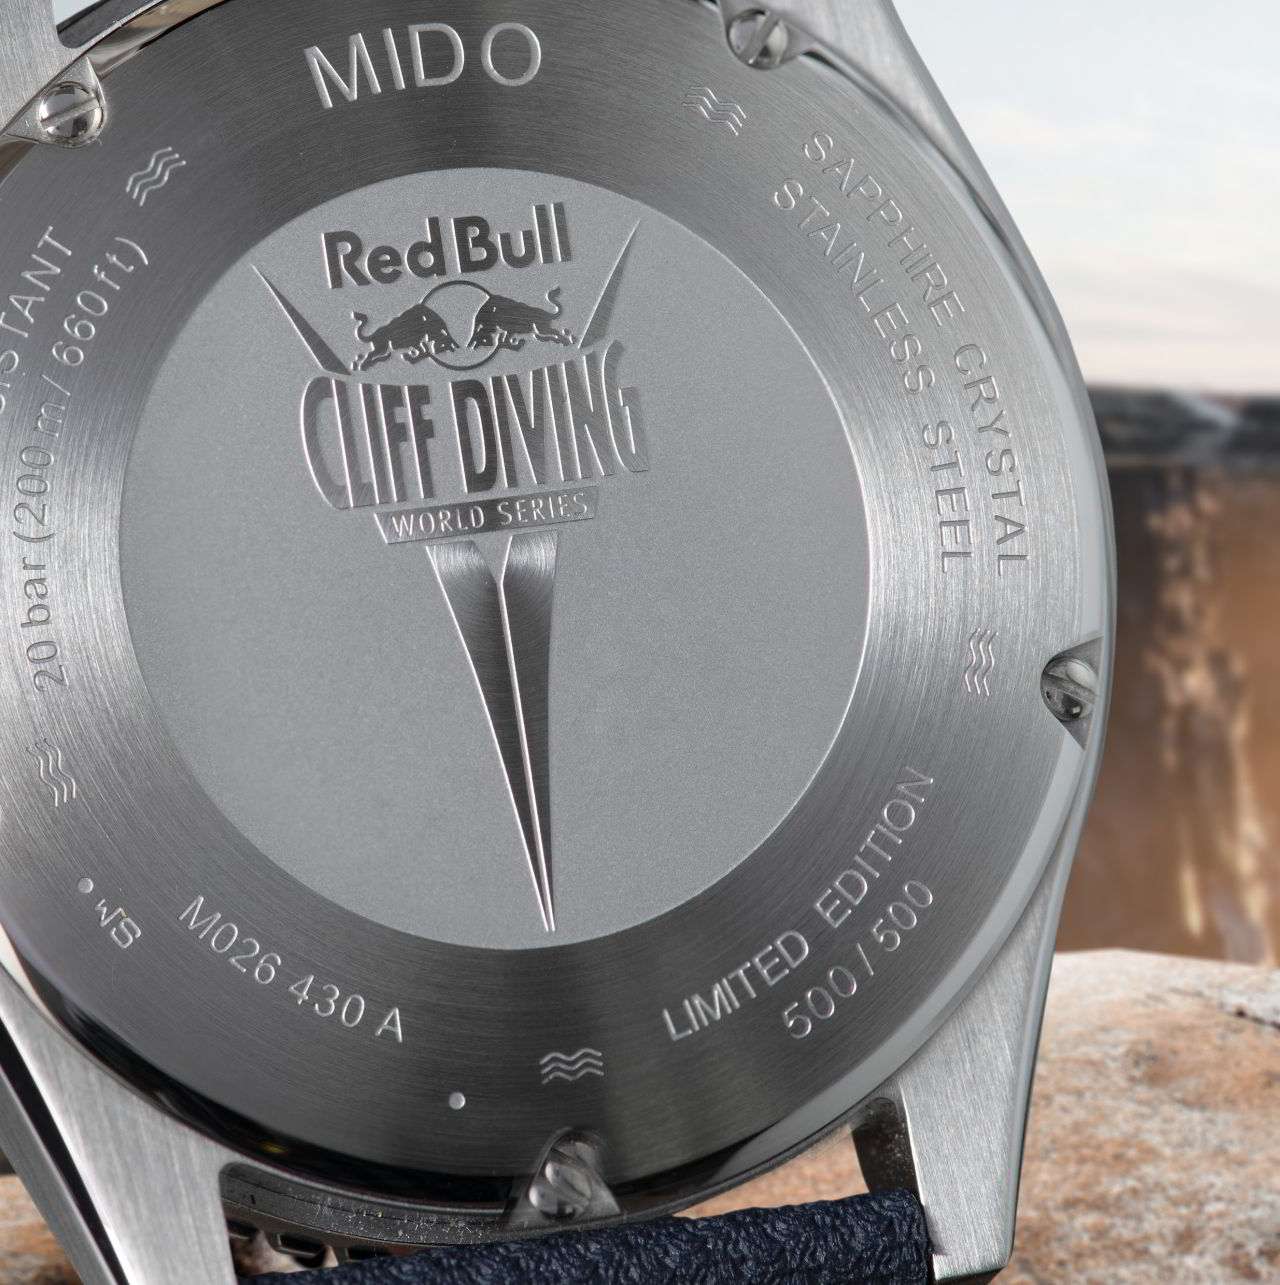 Mido Ocean Star 200 Red Bull Cliff Diving Limited Edition